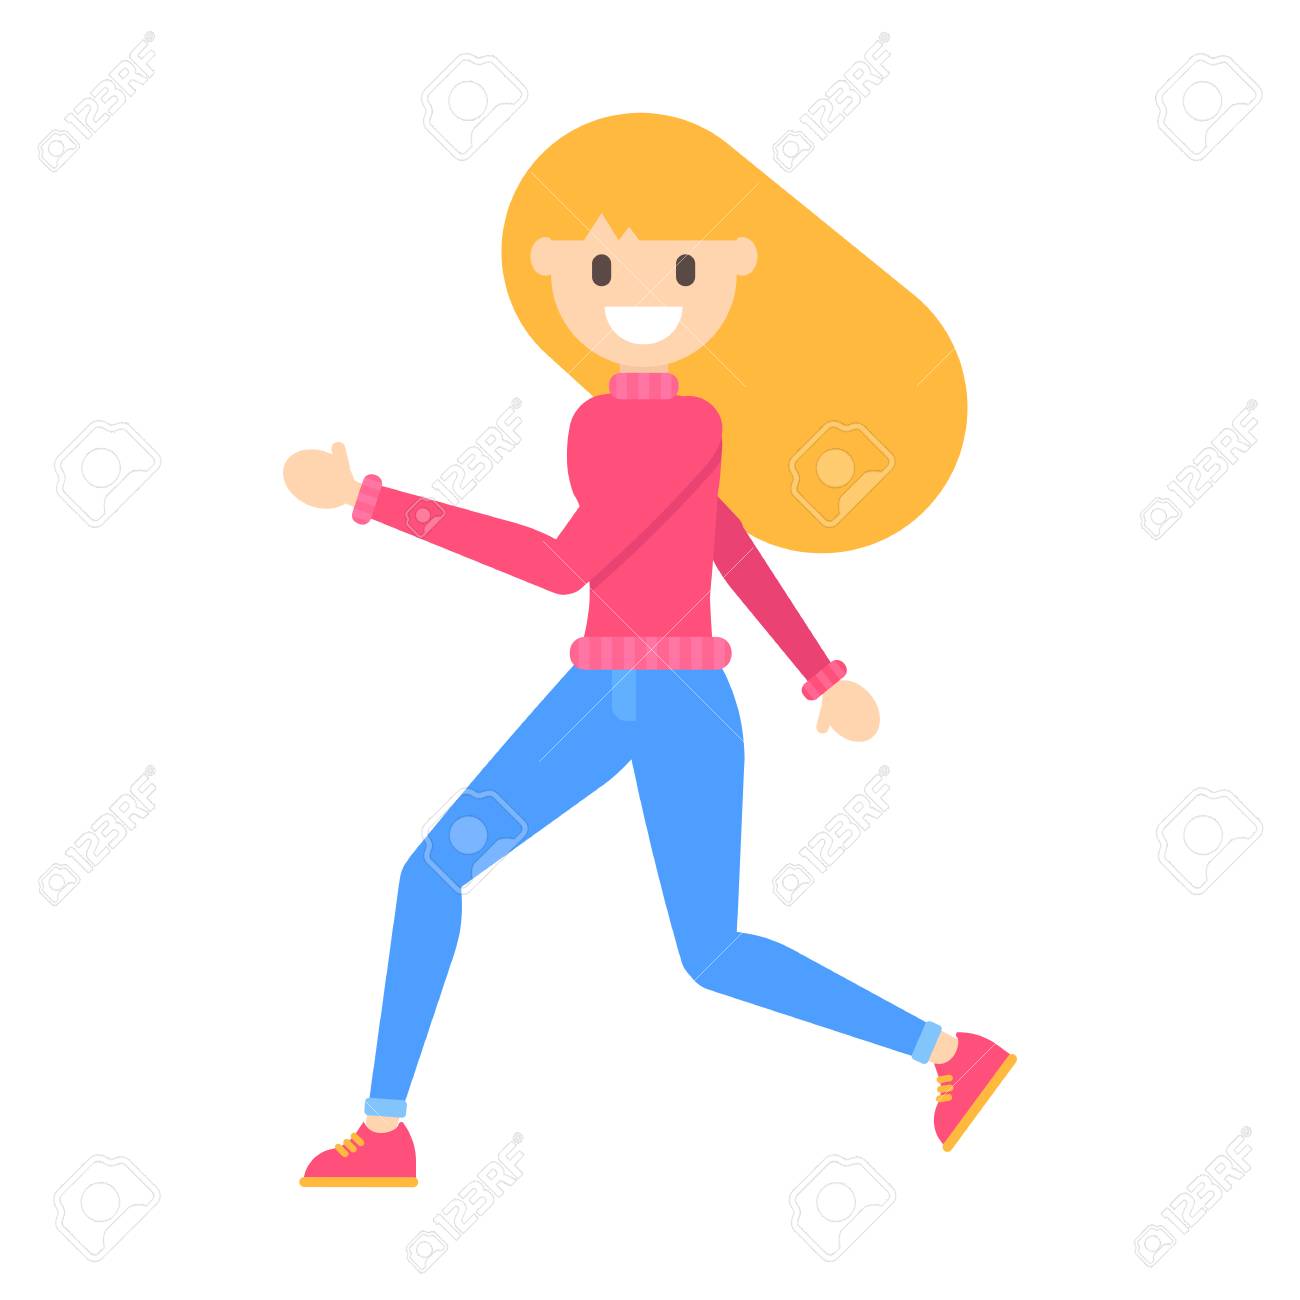 Free Blonde Clipart soccer girl, Download Free Clip Art on Owips.com.